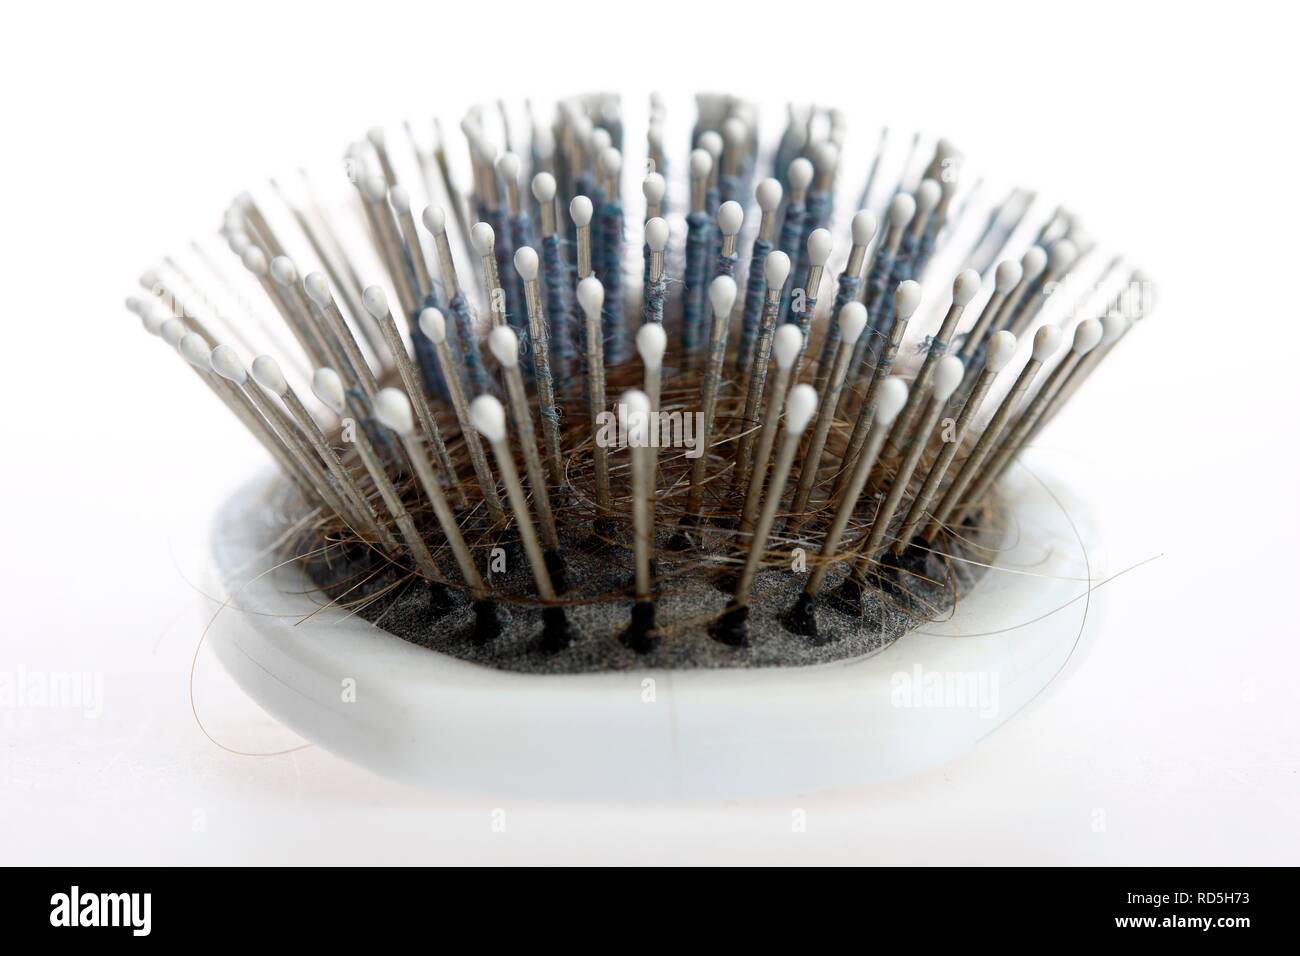 Hair brush with lots of hairs and fluff between the bristles Stock Photo